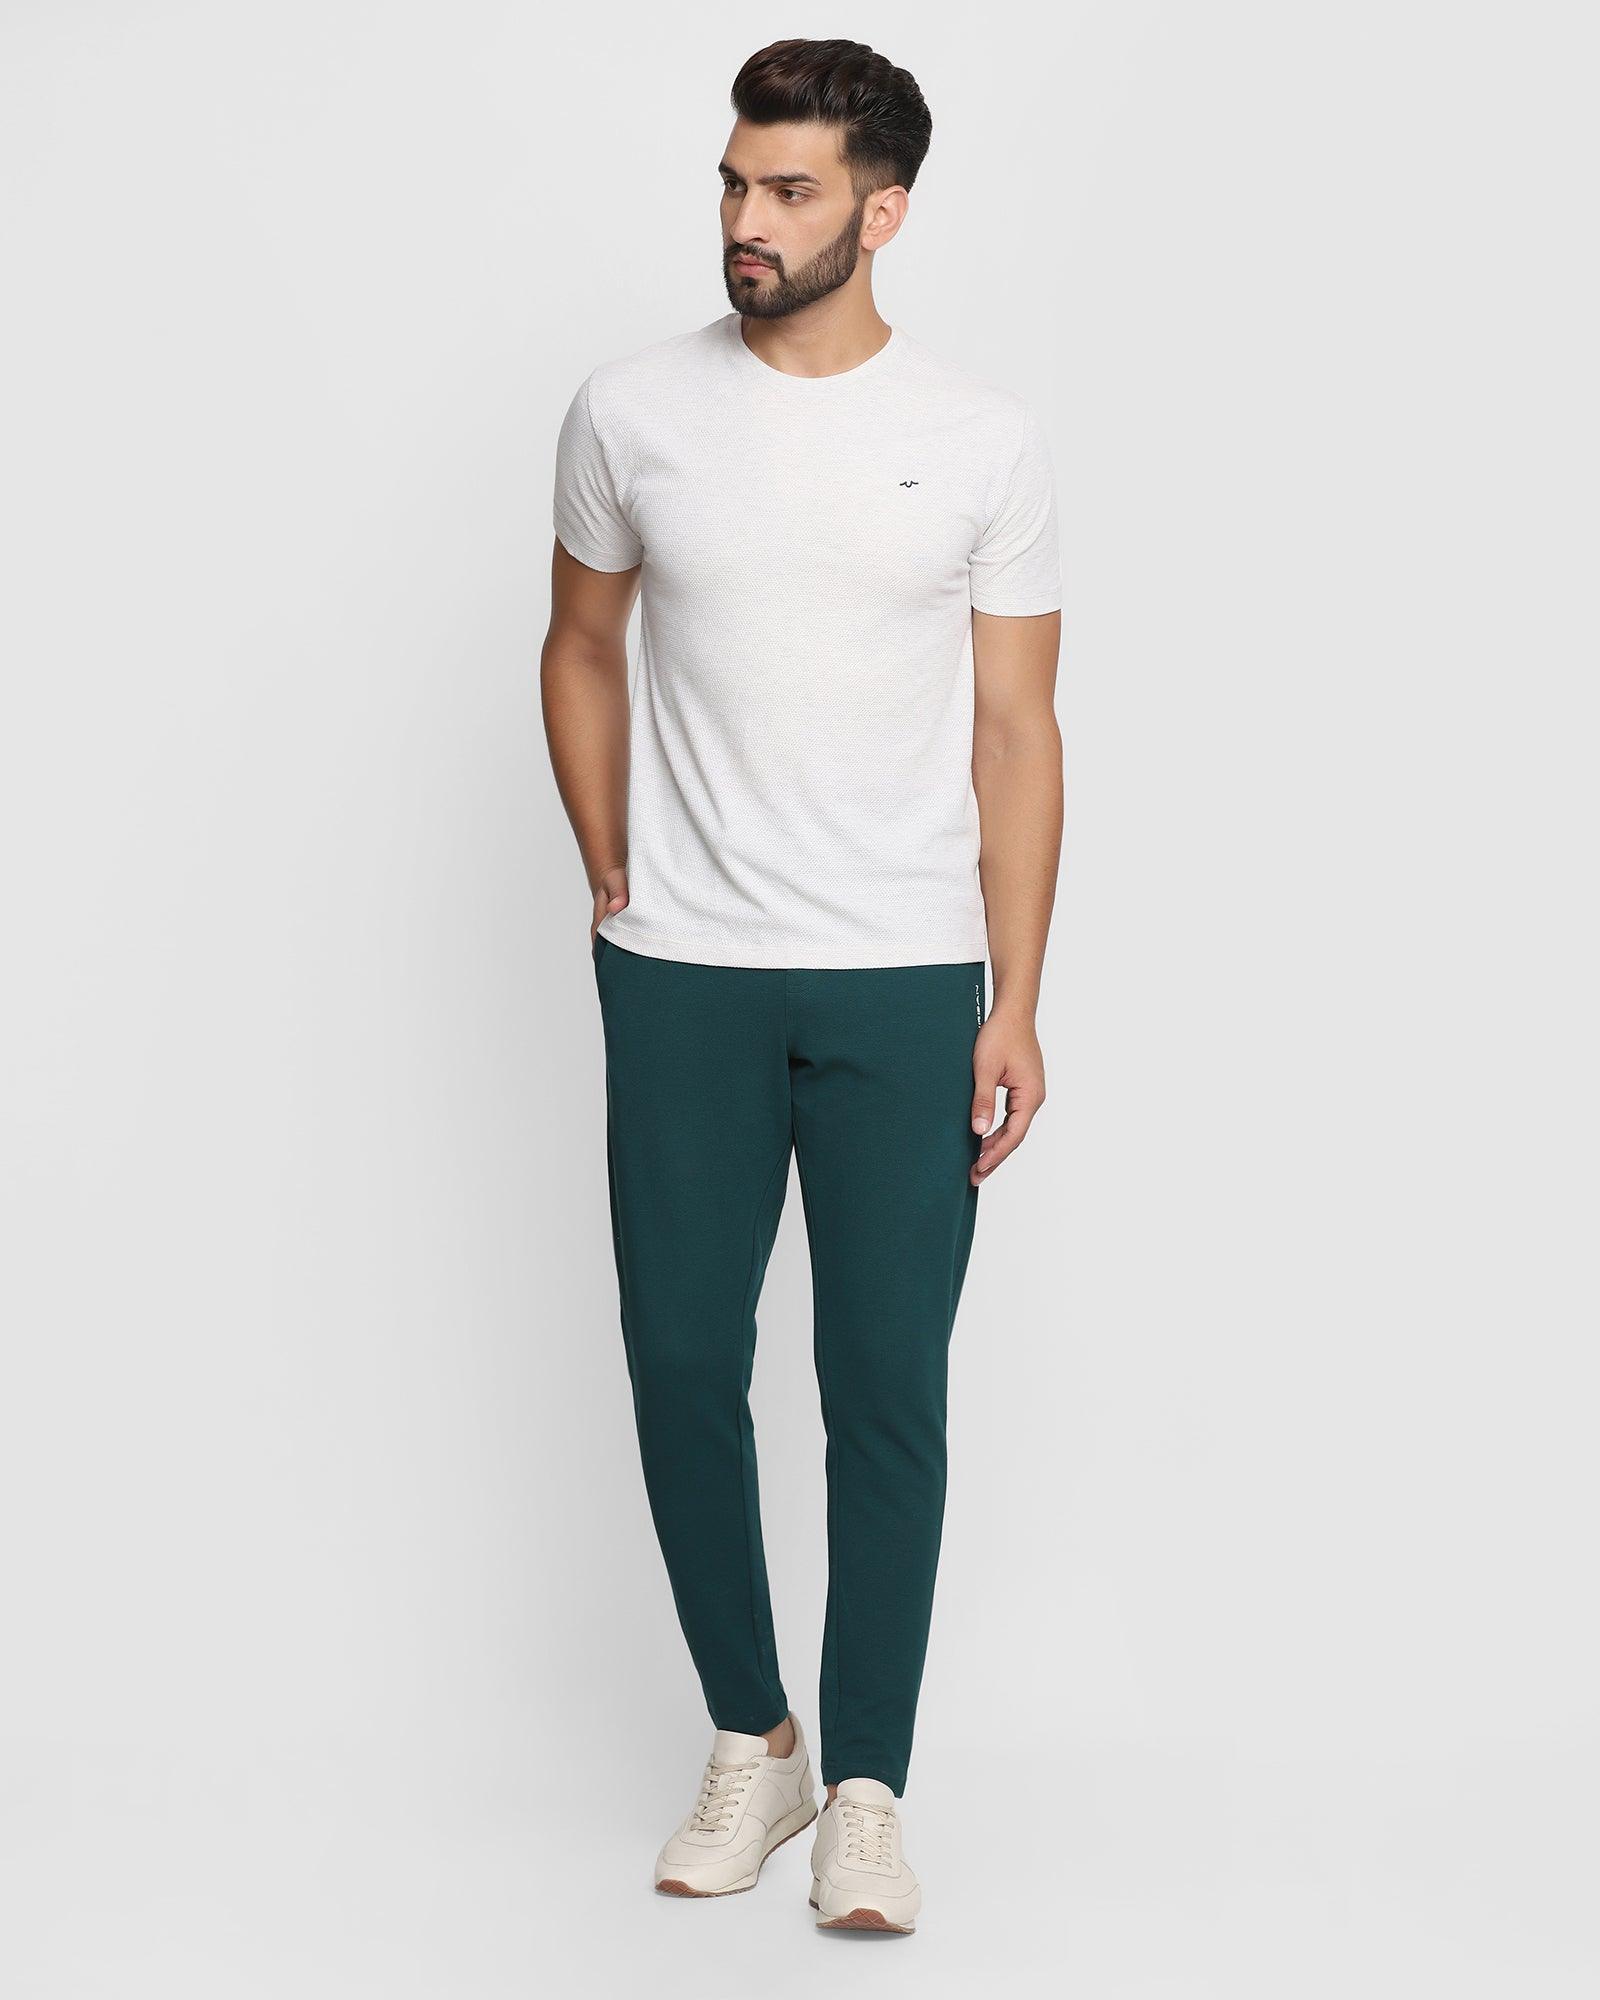 Casual Teal Solid Jogger - Champ